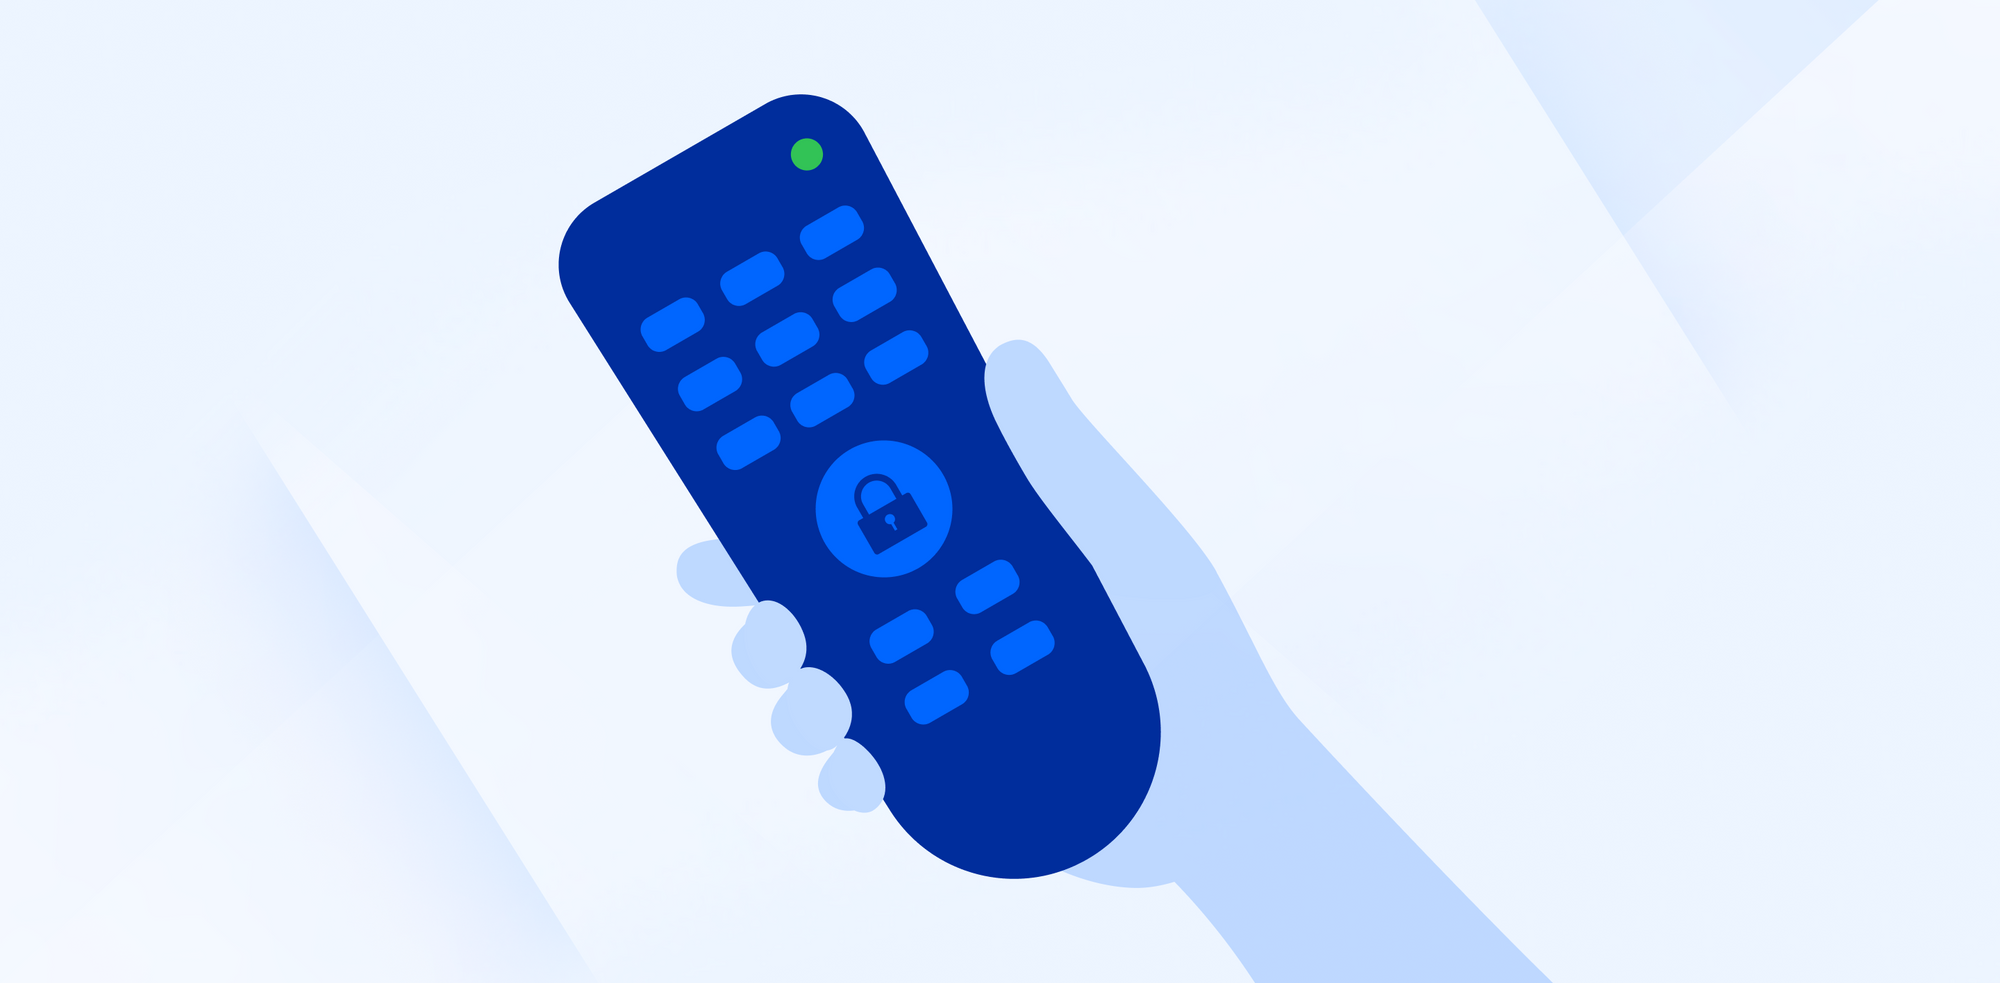 Remote control for cybersecurity TV. 